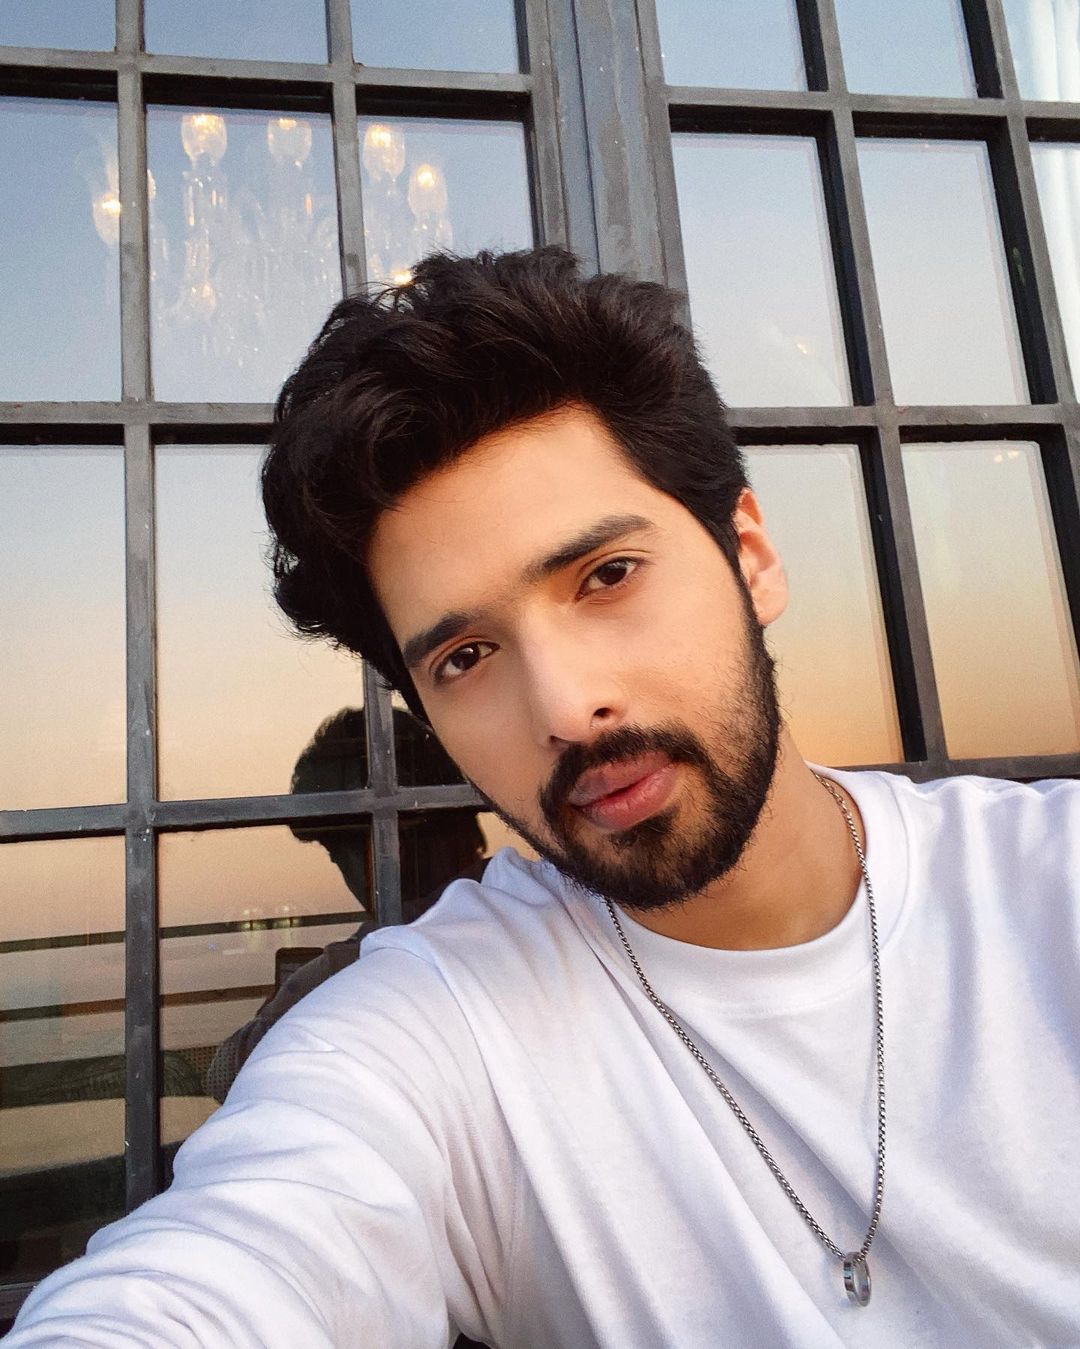 You are currently viewing Armaan Malik (Singer) Bio, Age, Wife, Songs, Wikipedia & More